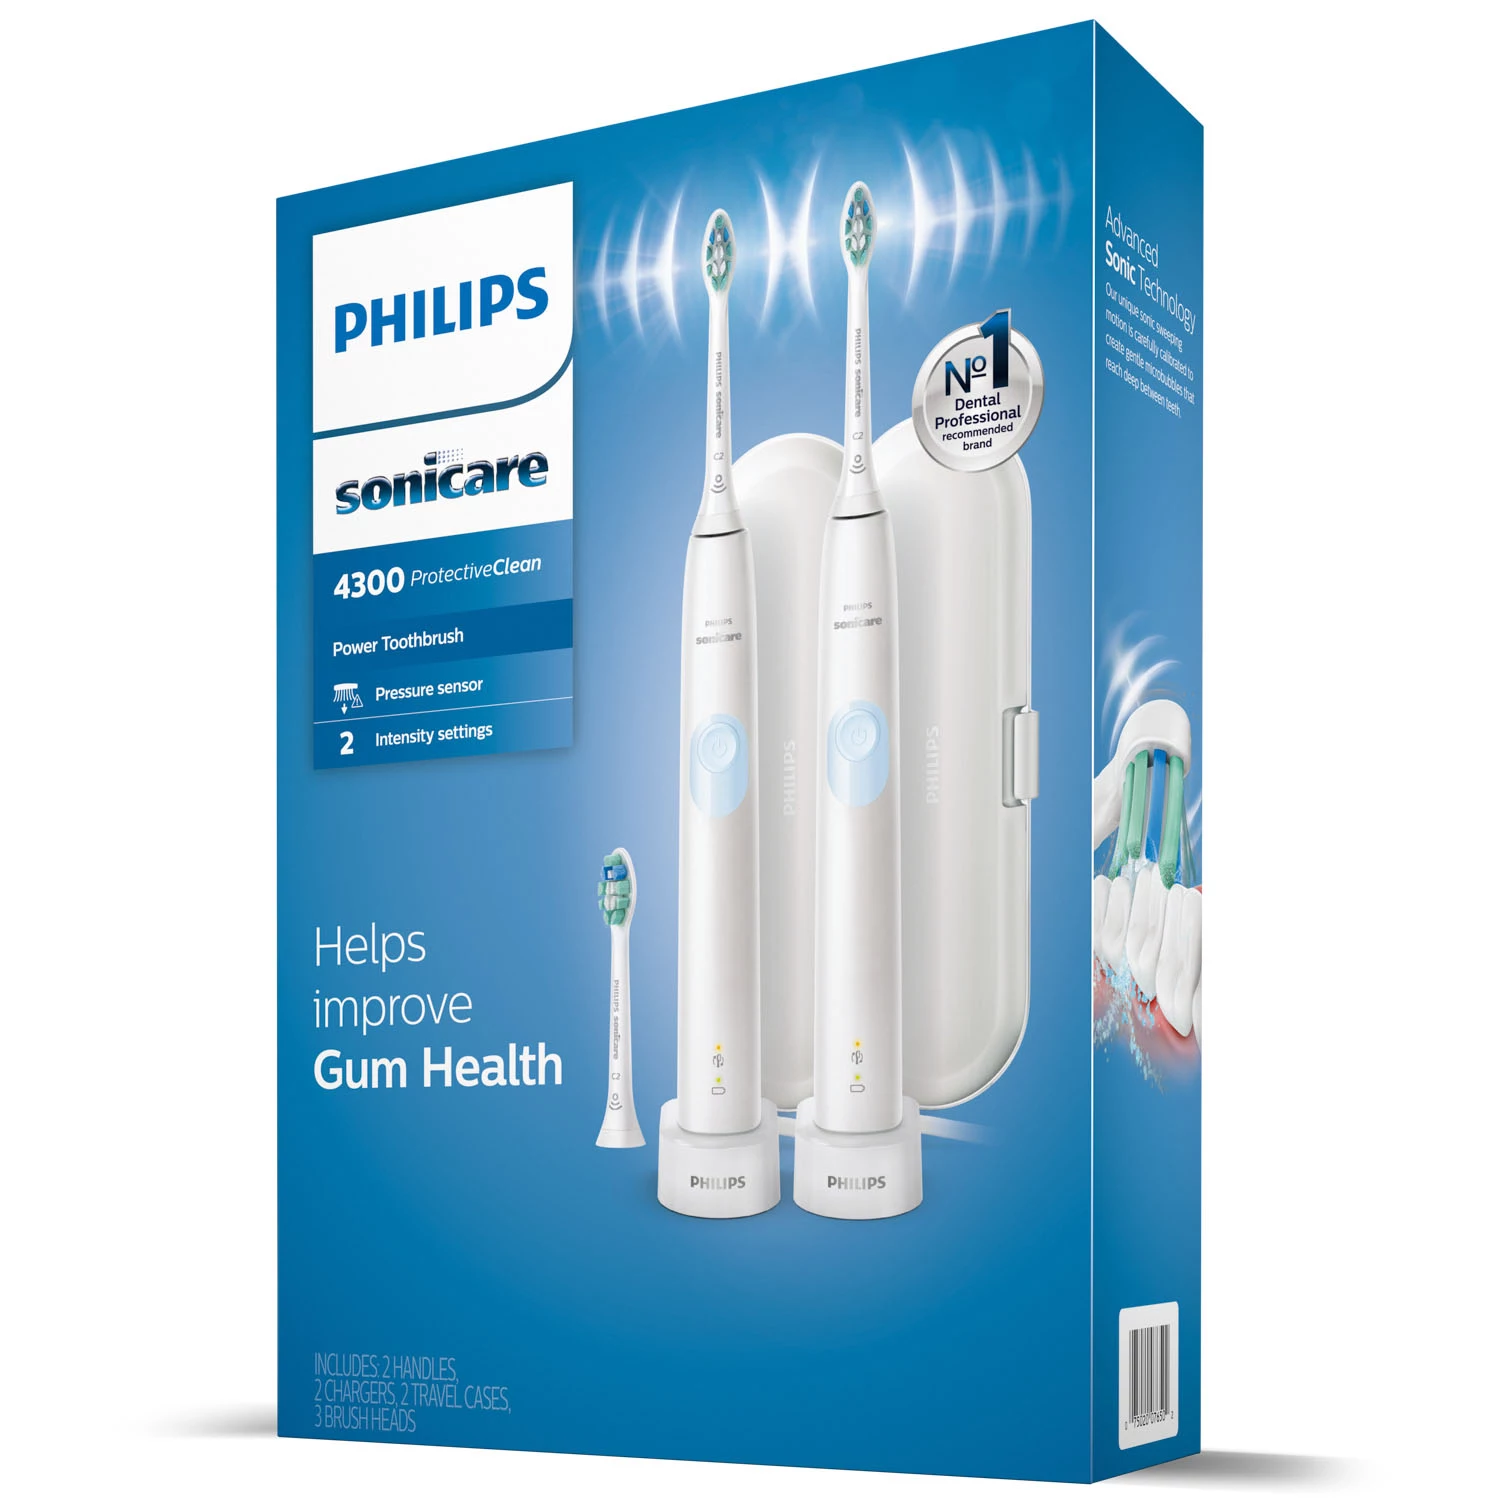 Philips Sonicare ProtectiveClean 4300 Rechargeable Toothbrush, 2 pk. (Choose Your Color)